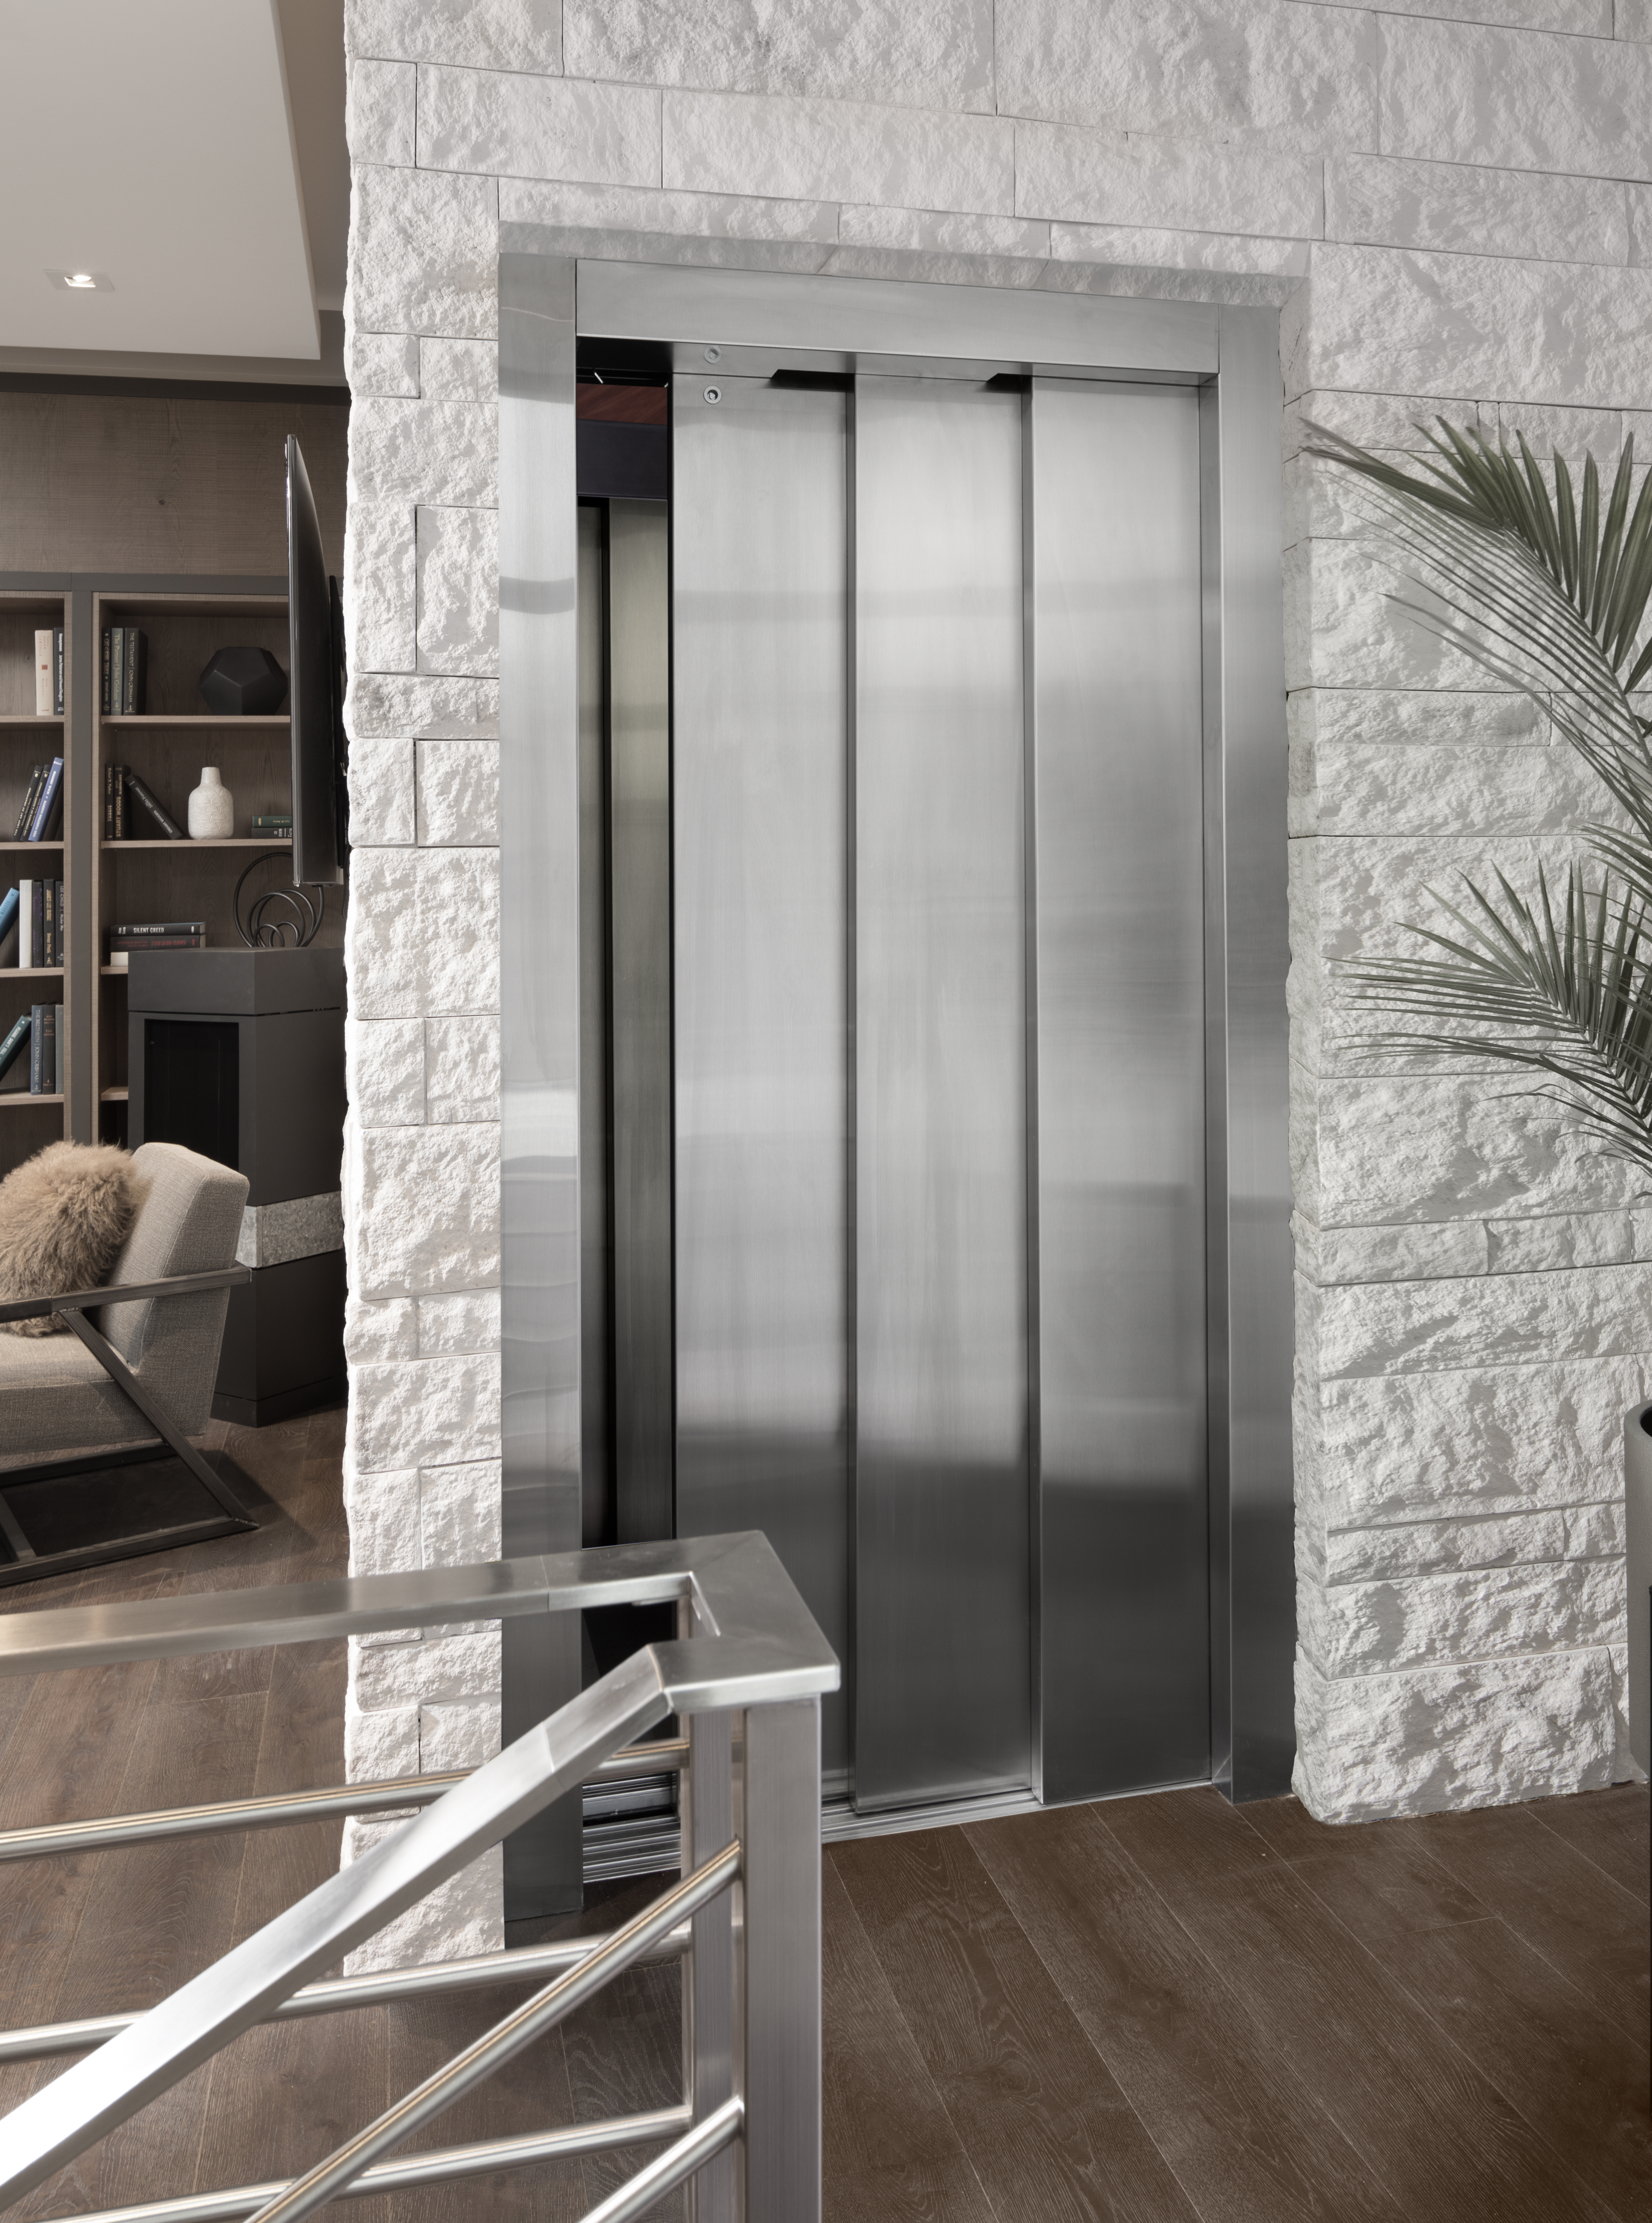 Home Elevators and Residential Elevators